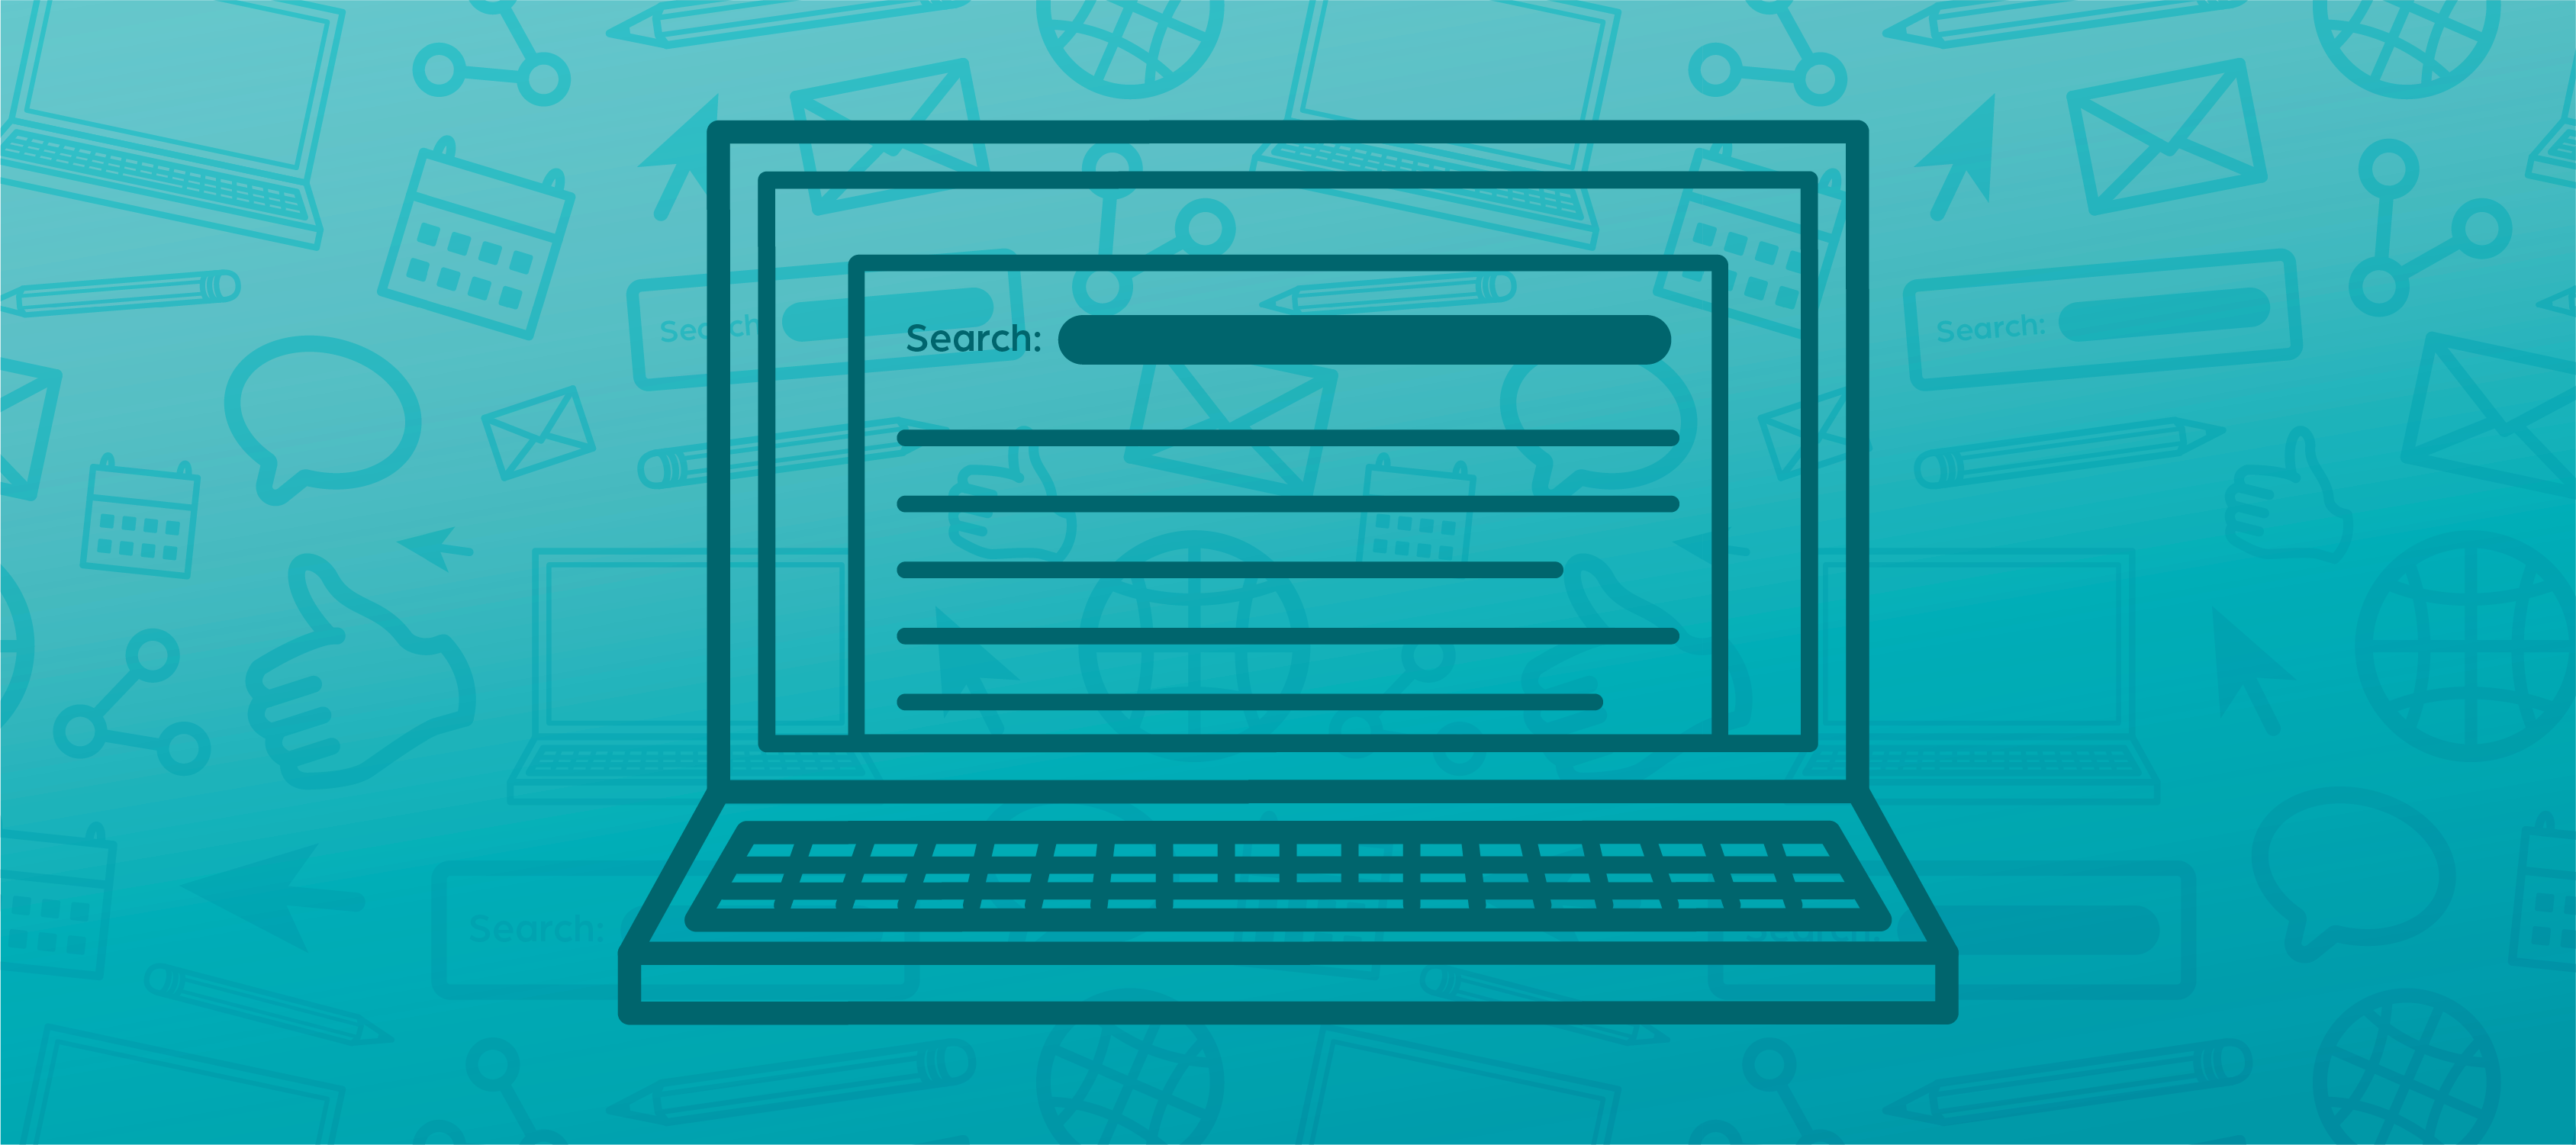 A blue header image featuring an icon of a laptop with a search window open in the center and faded internet icons in the background